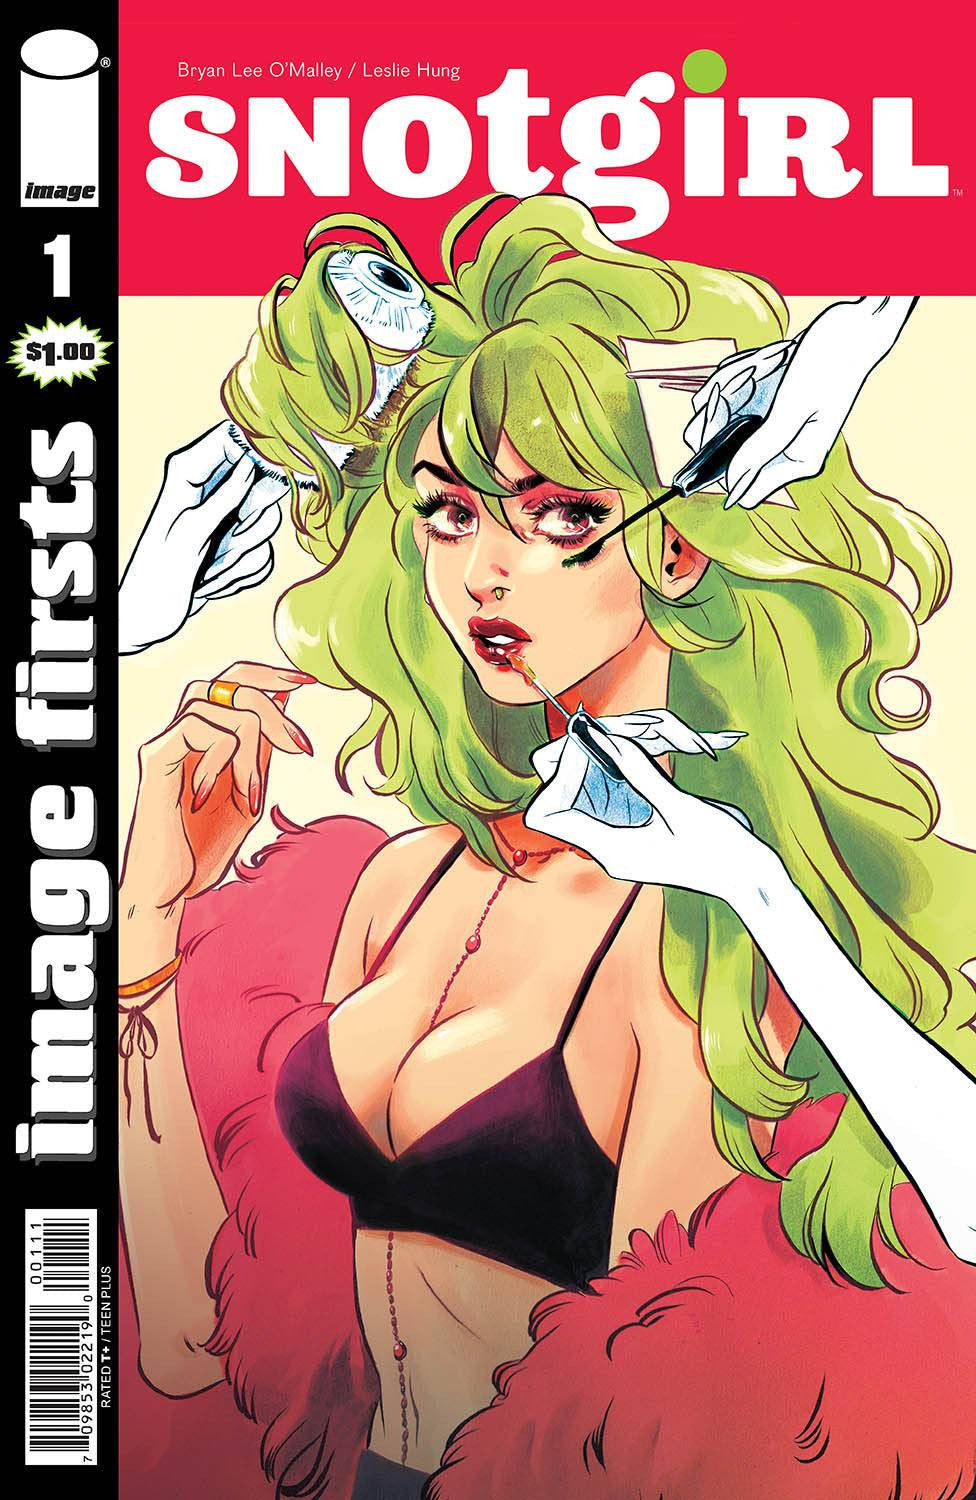 IMAGE FIRSTS SNOTGIRL #1 COVER